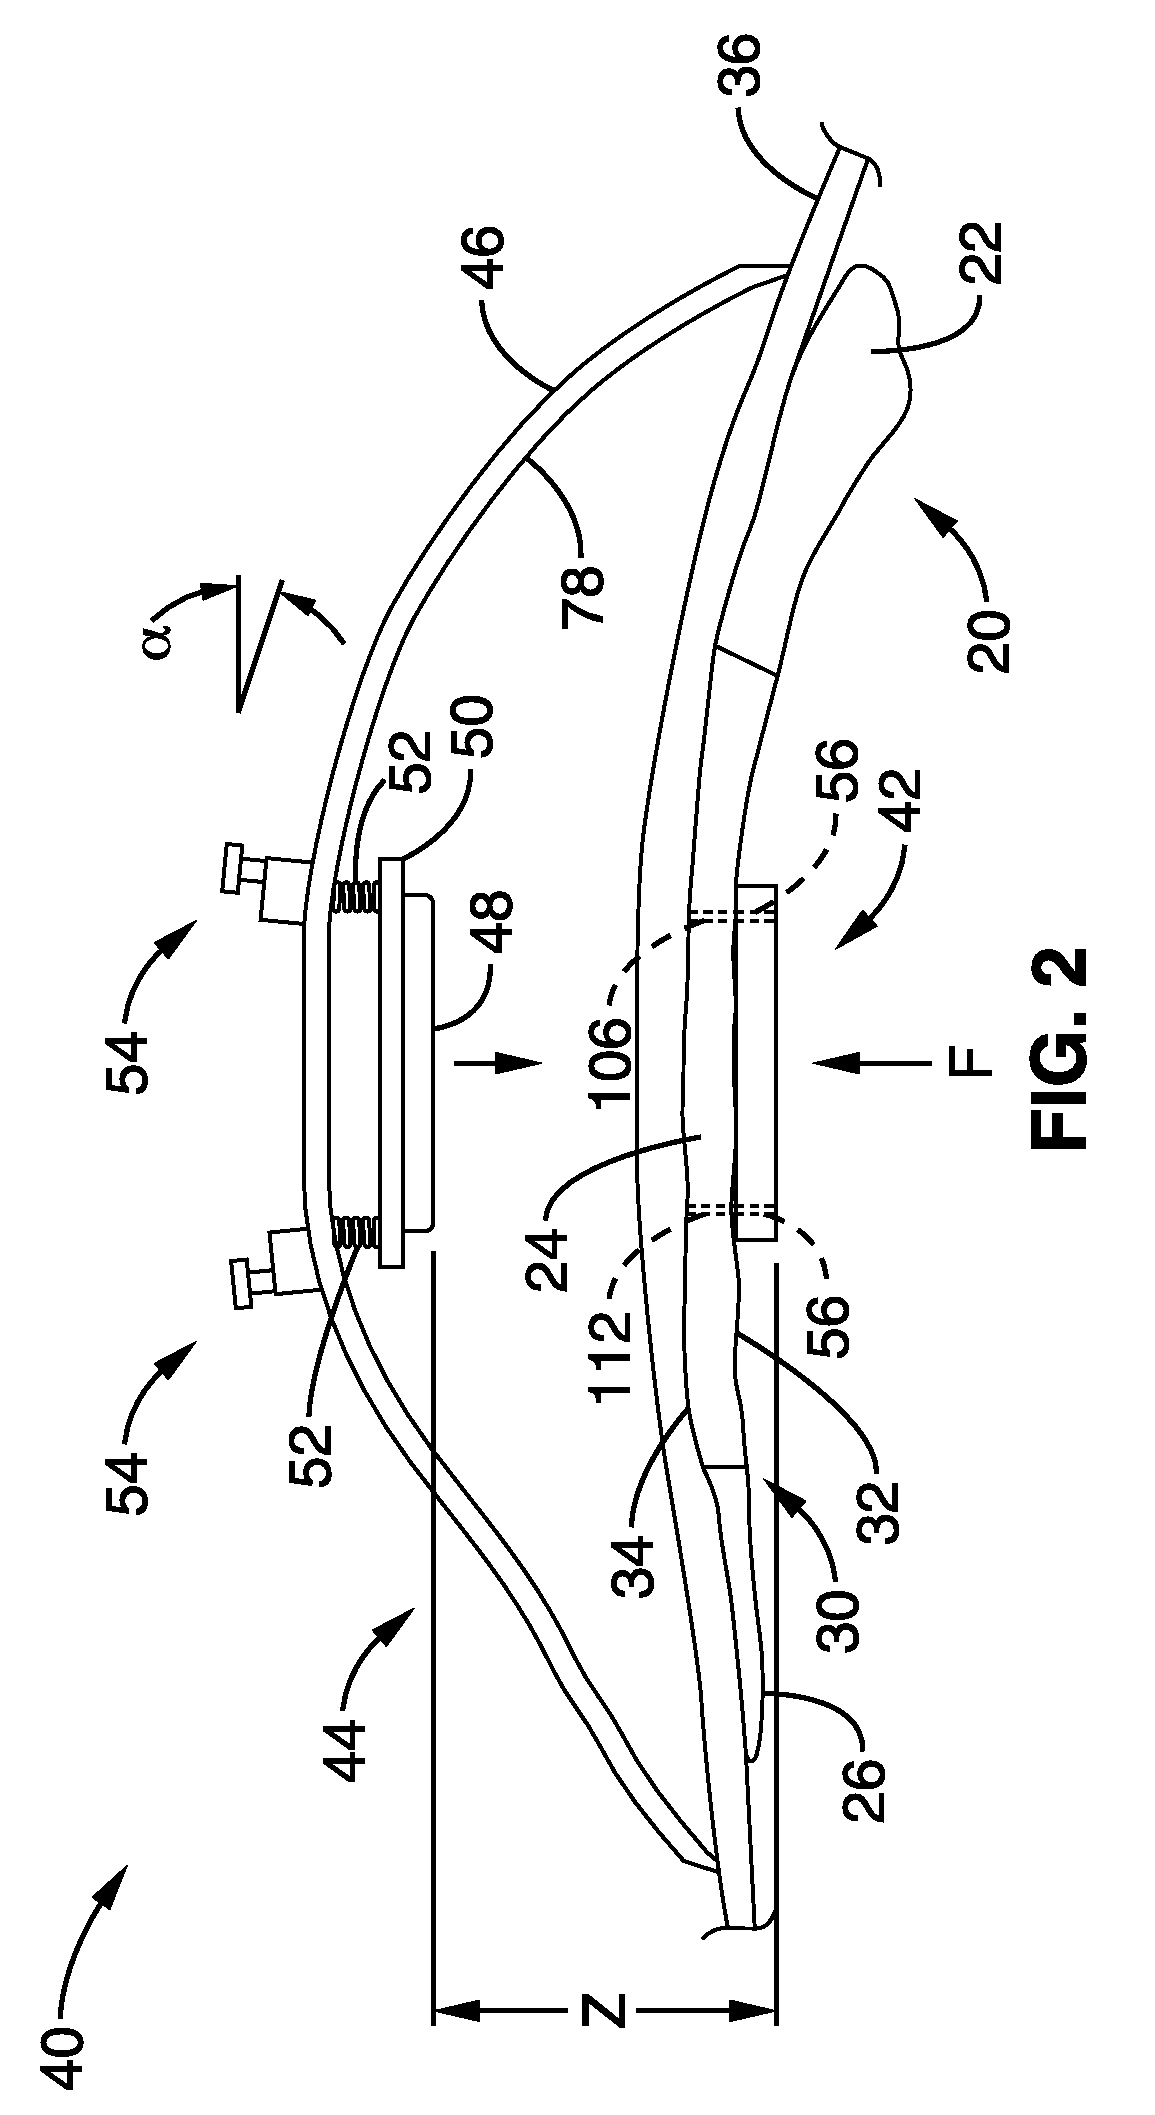 Apparatus and method for magnetic alteration of anatomical features